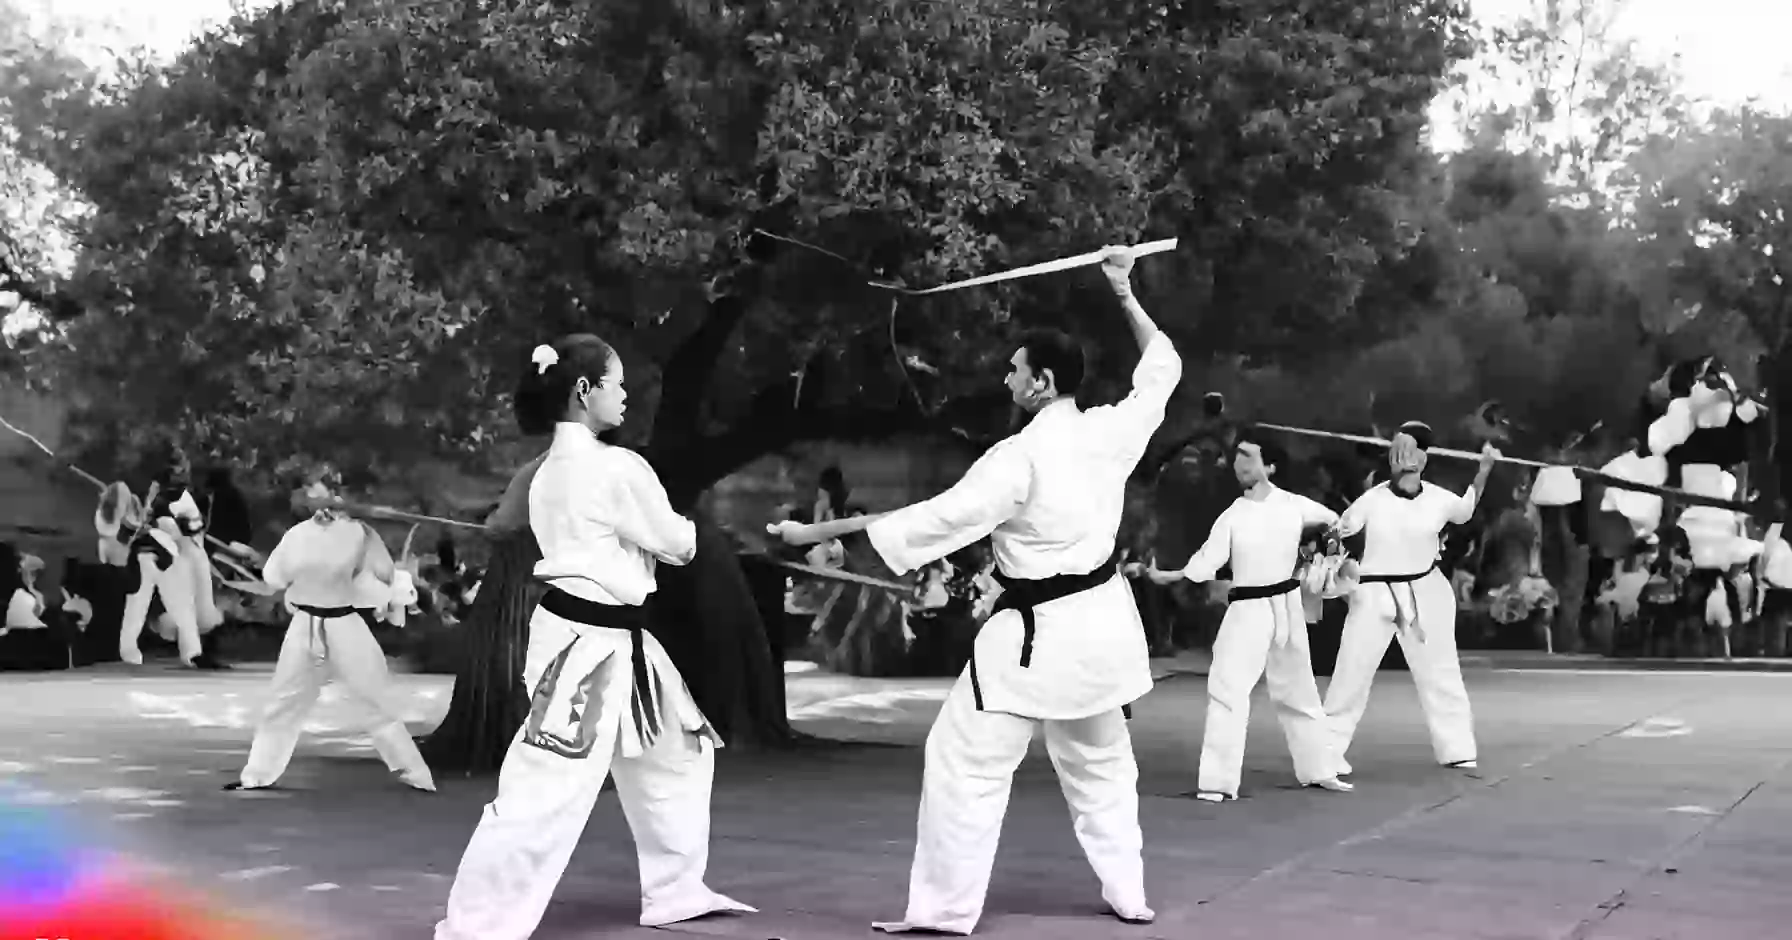 Are there any martial arts traditions in India?